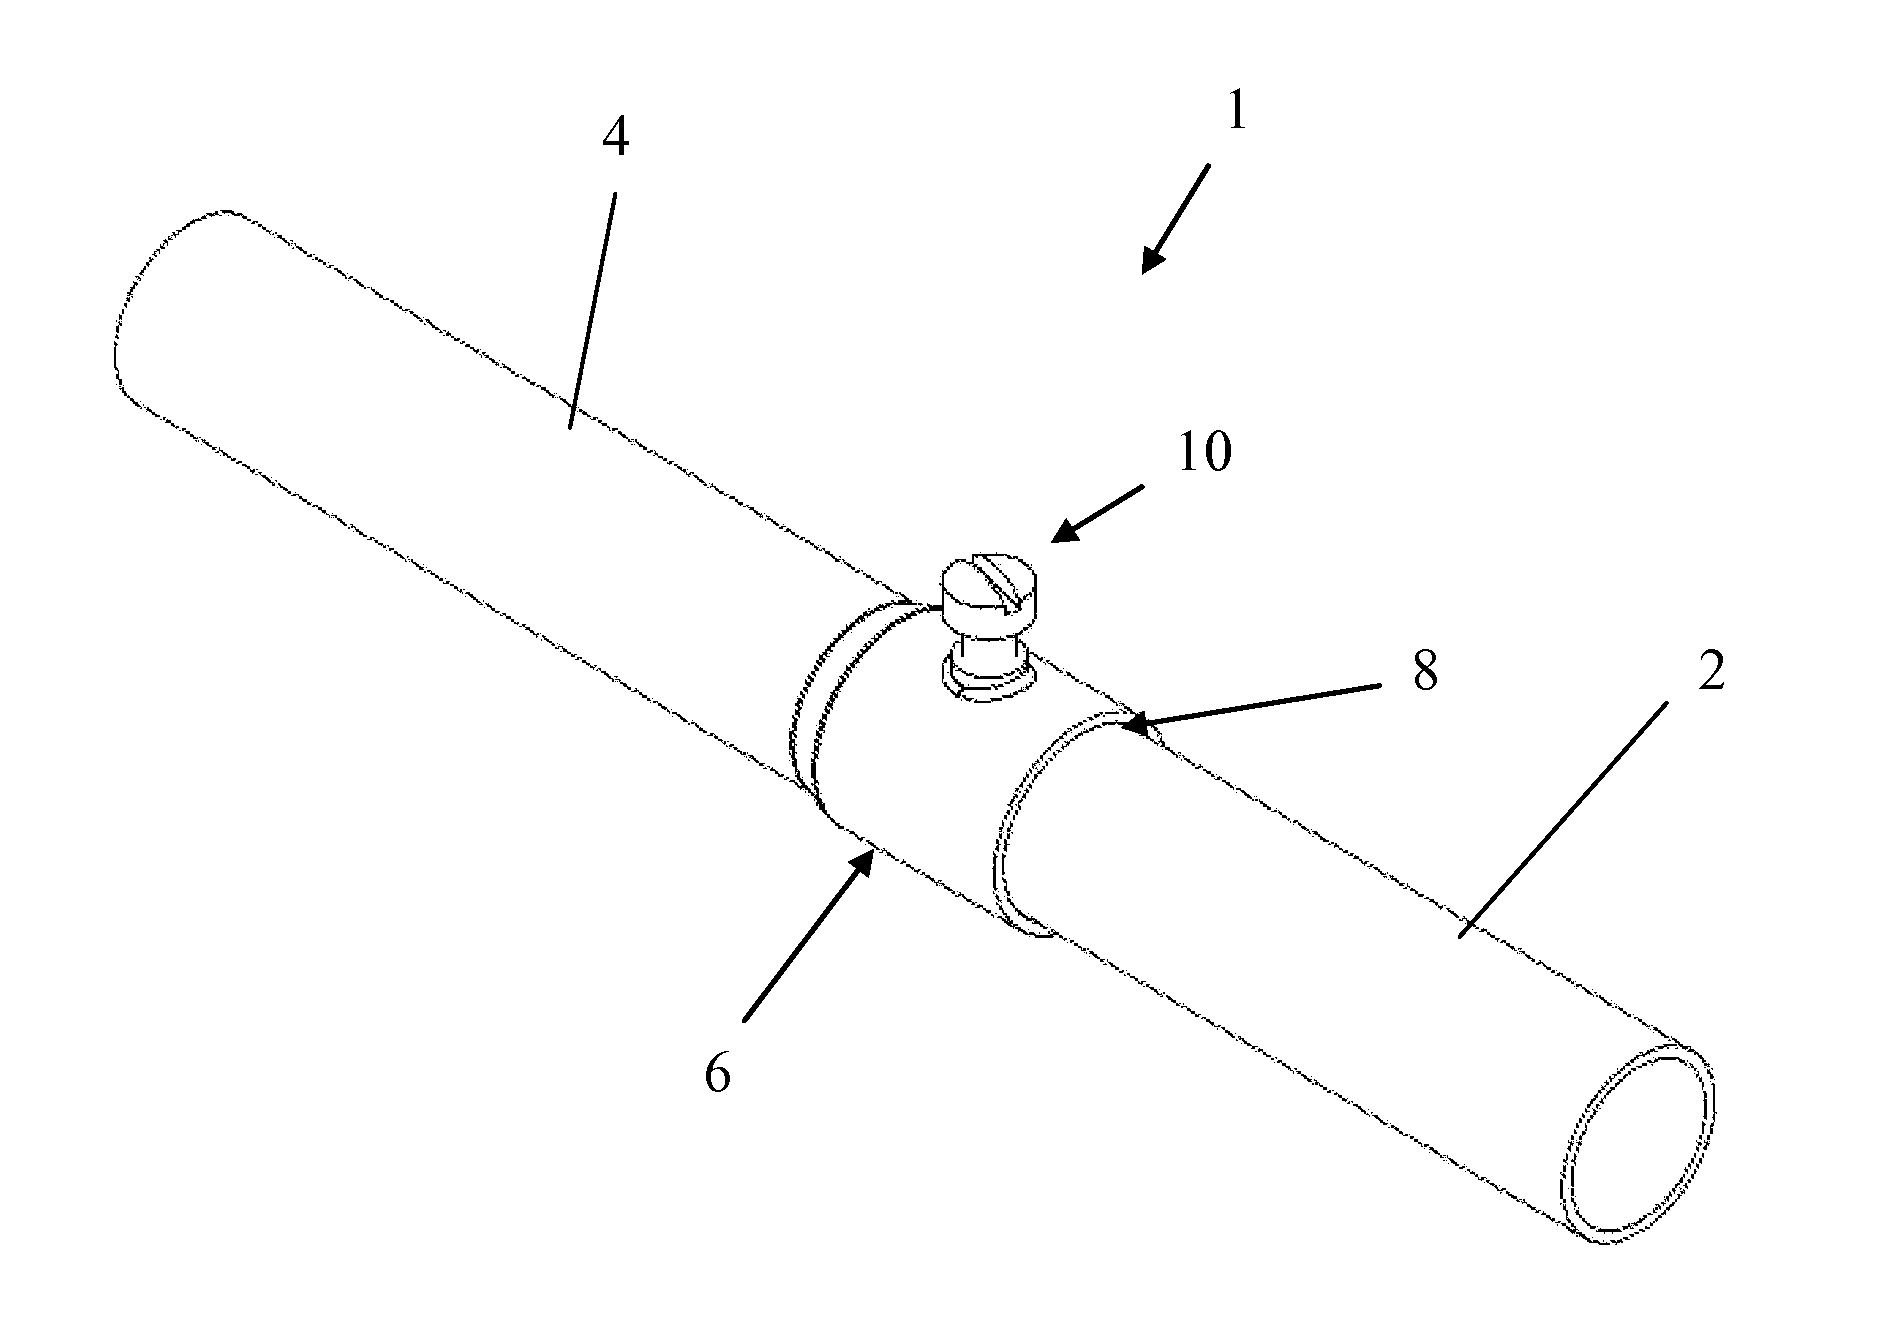 Integral coupling for joining conduit sections